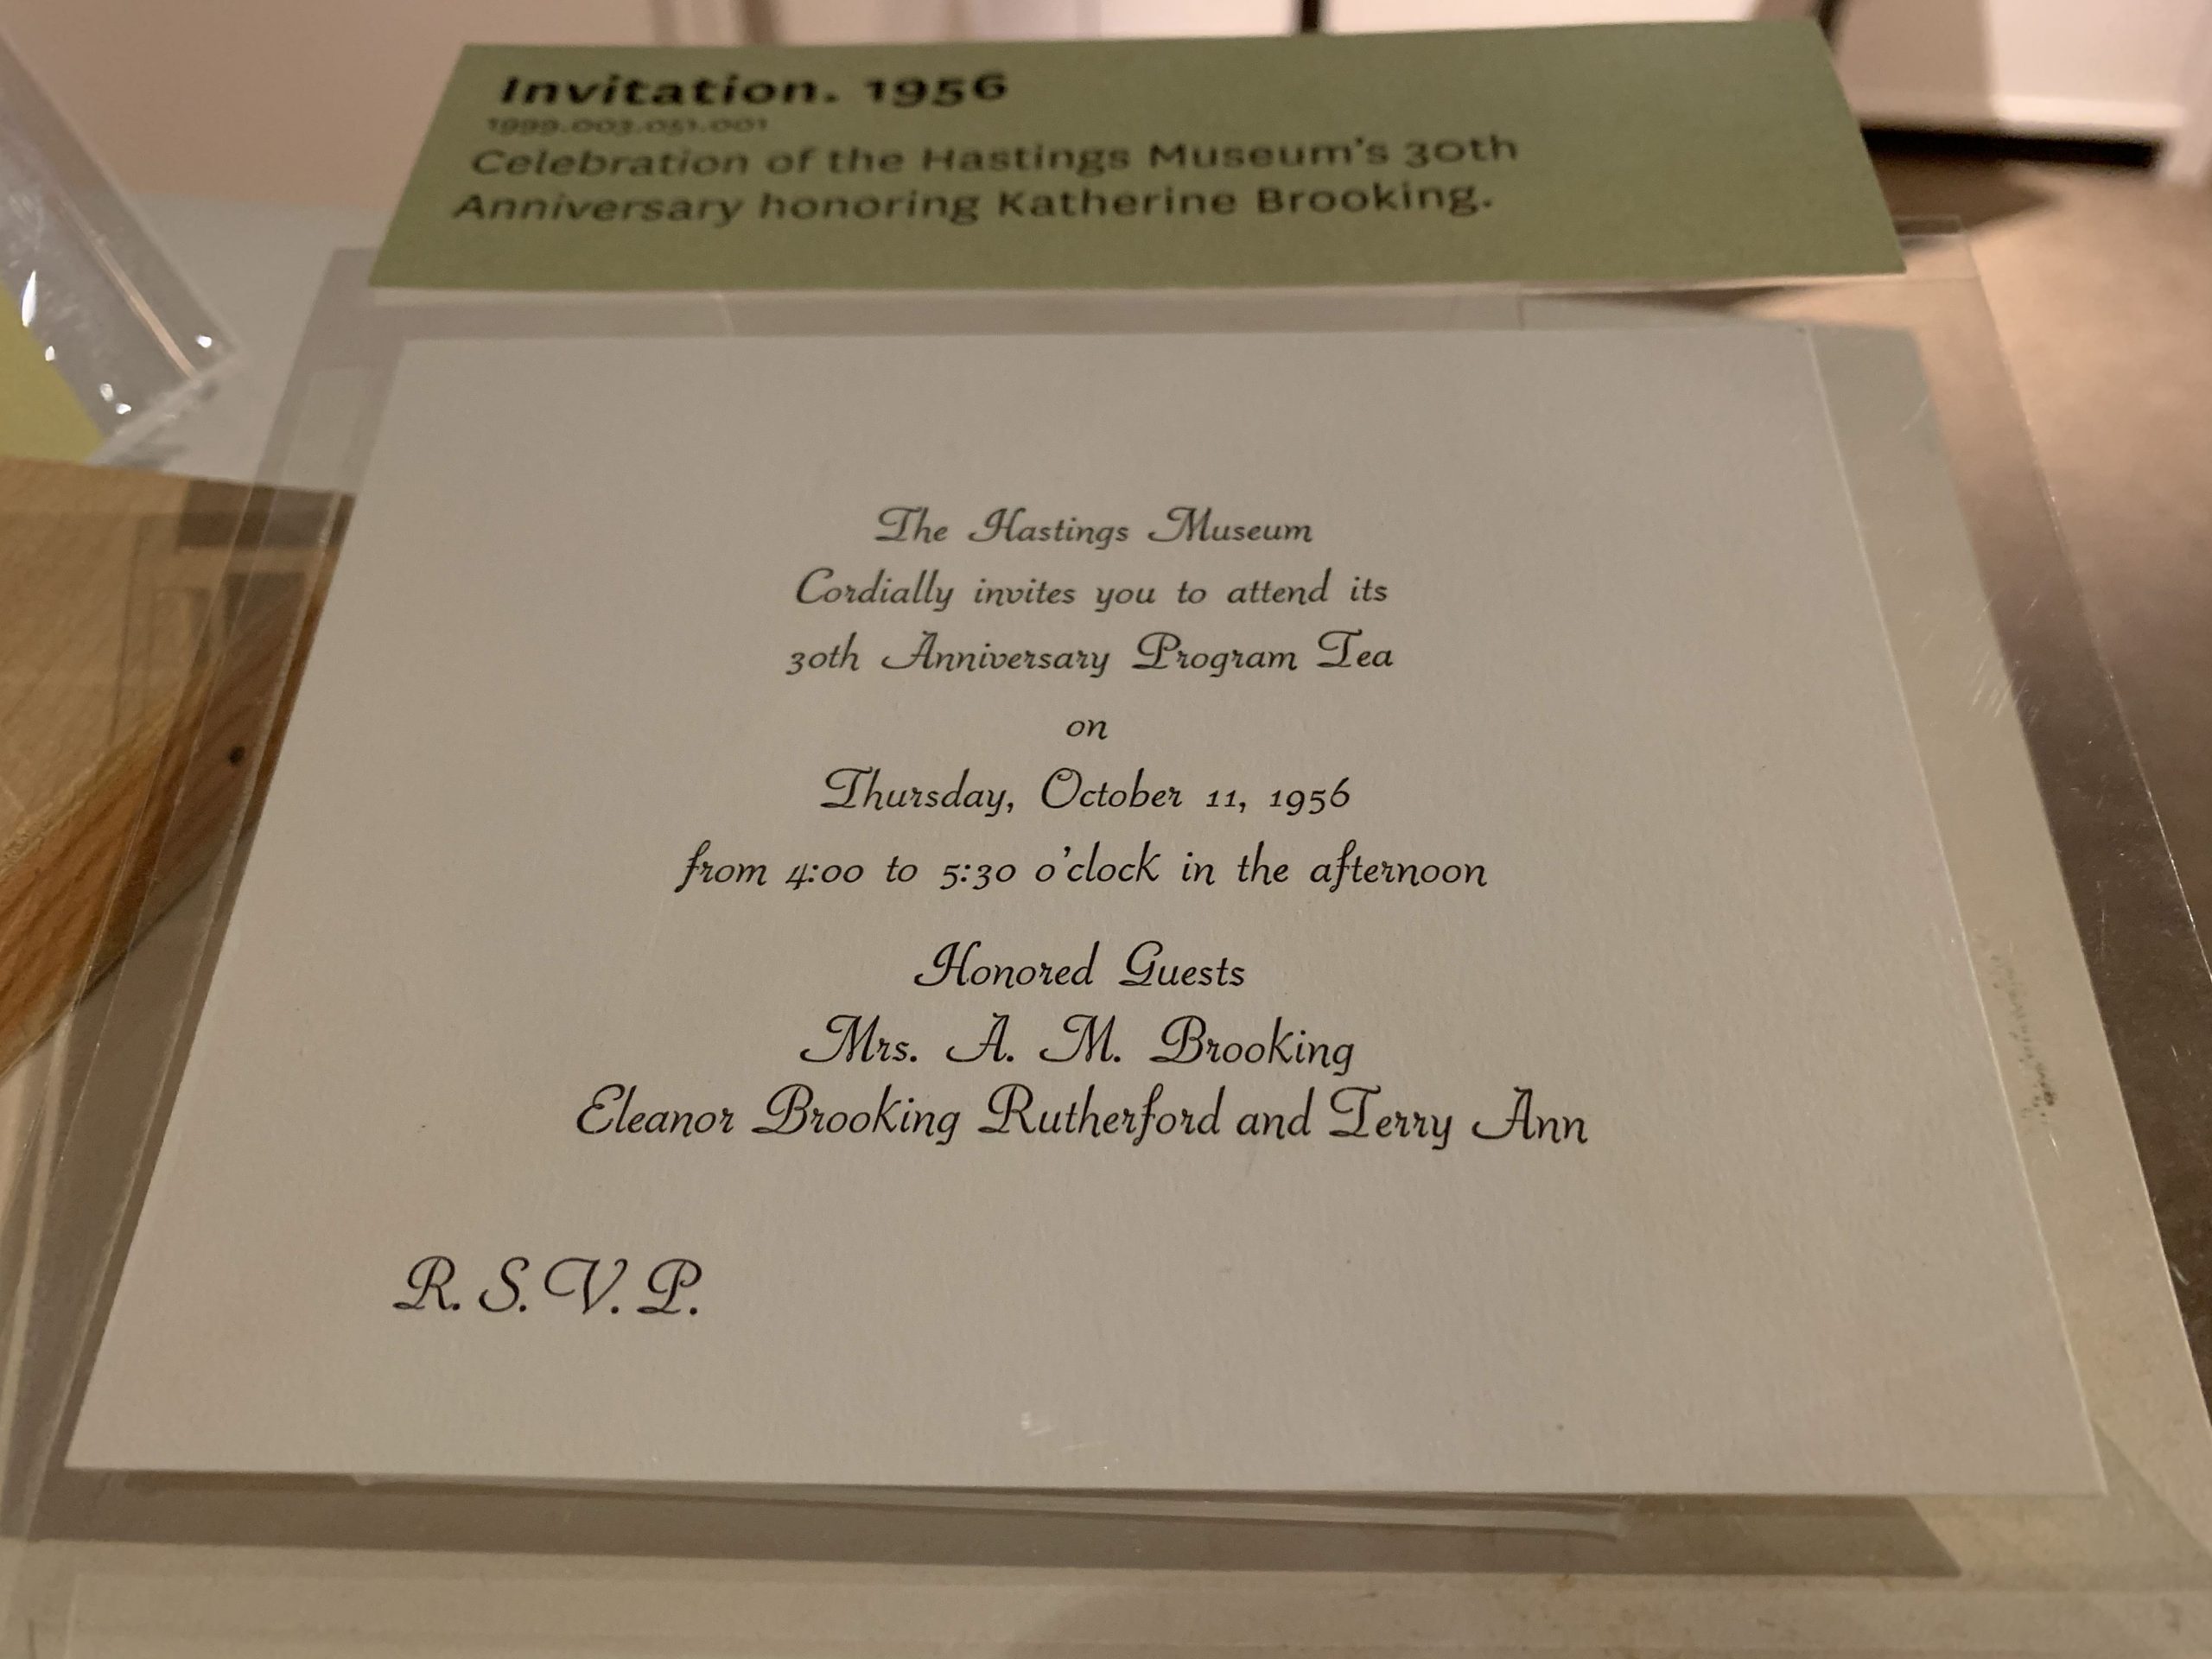 Invitation, 1956. Celebration of the Hastings Museum’s 30th Anniversary honoring Katherine Brooking.